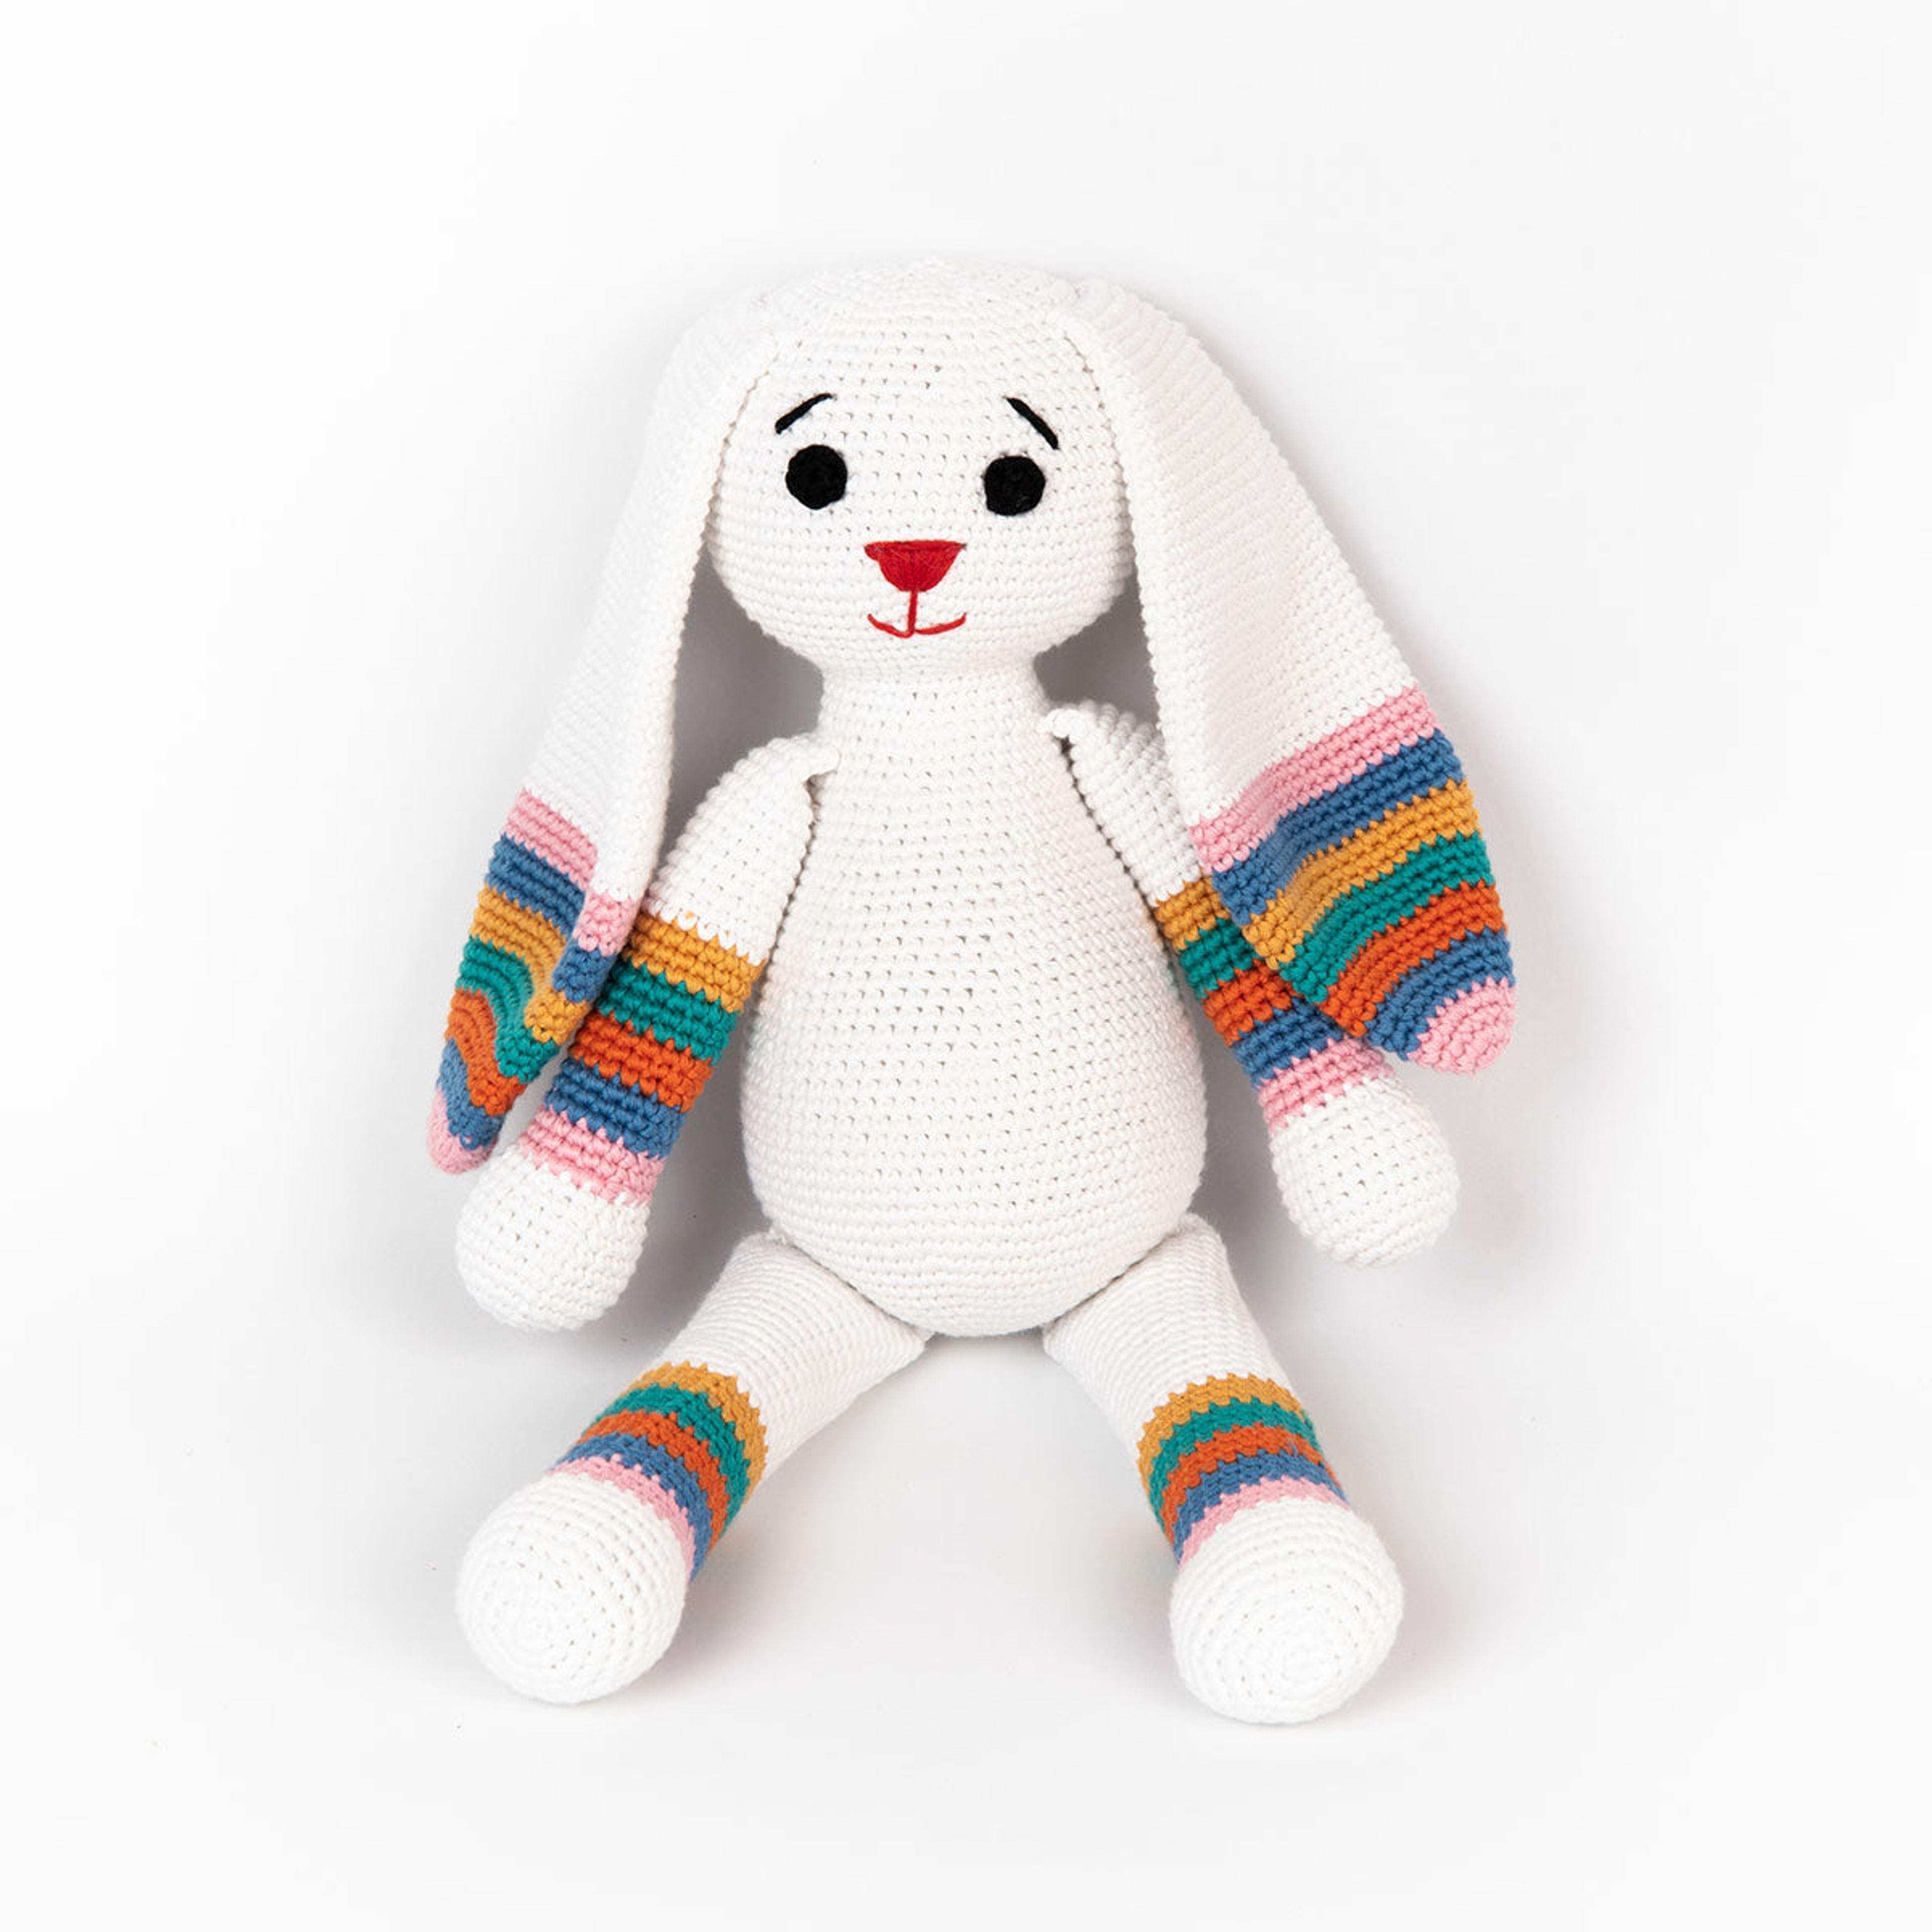 Betsy the Bunny Hand Knitted Organic Stuffed Animal